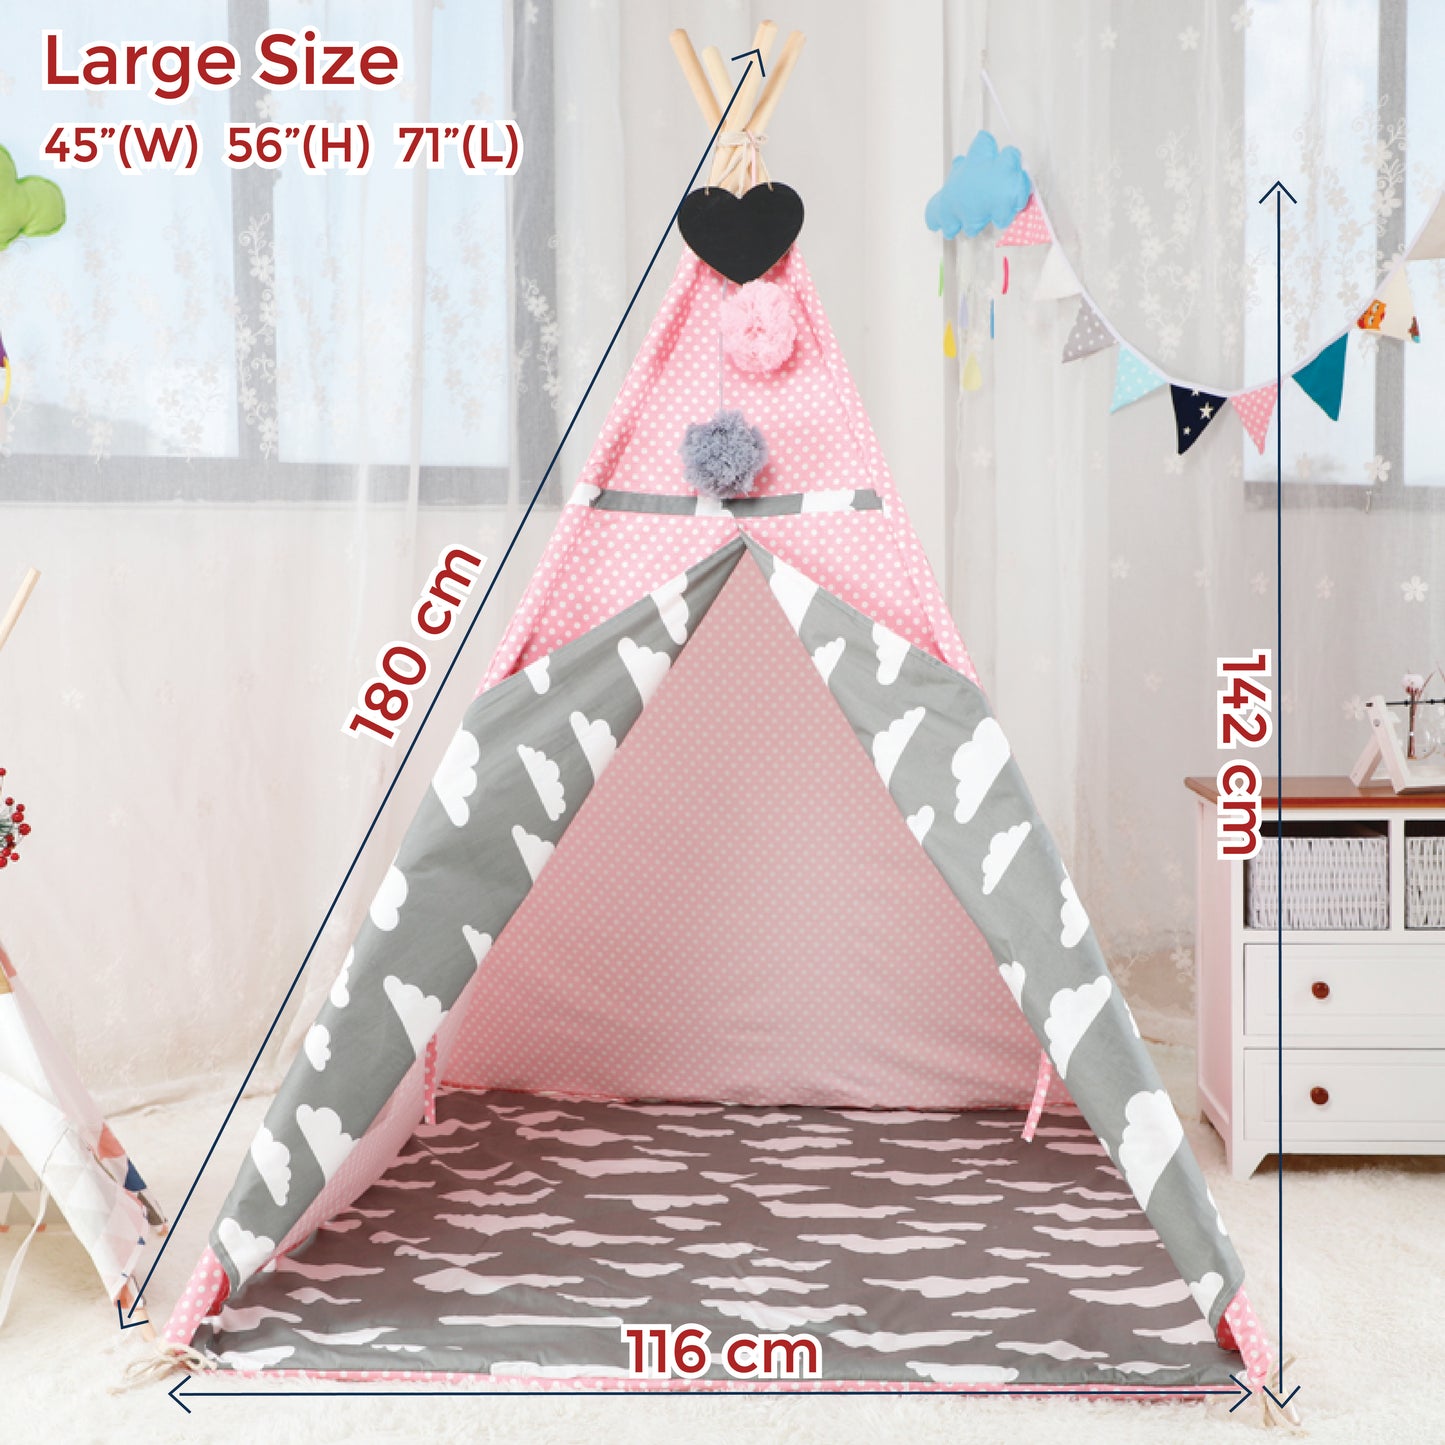 Kid’s Portable Teepee Tents with Cushion, Led Light and Non-Slip Padded Mat, Play Tent, Indoor & Outdoor Playhouse Tents for Childrens ( Pink Cloud )